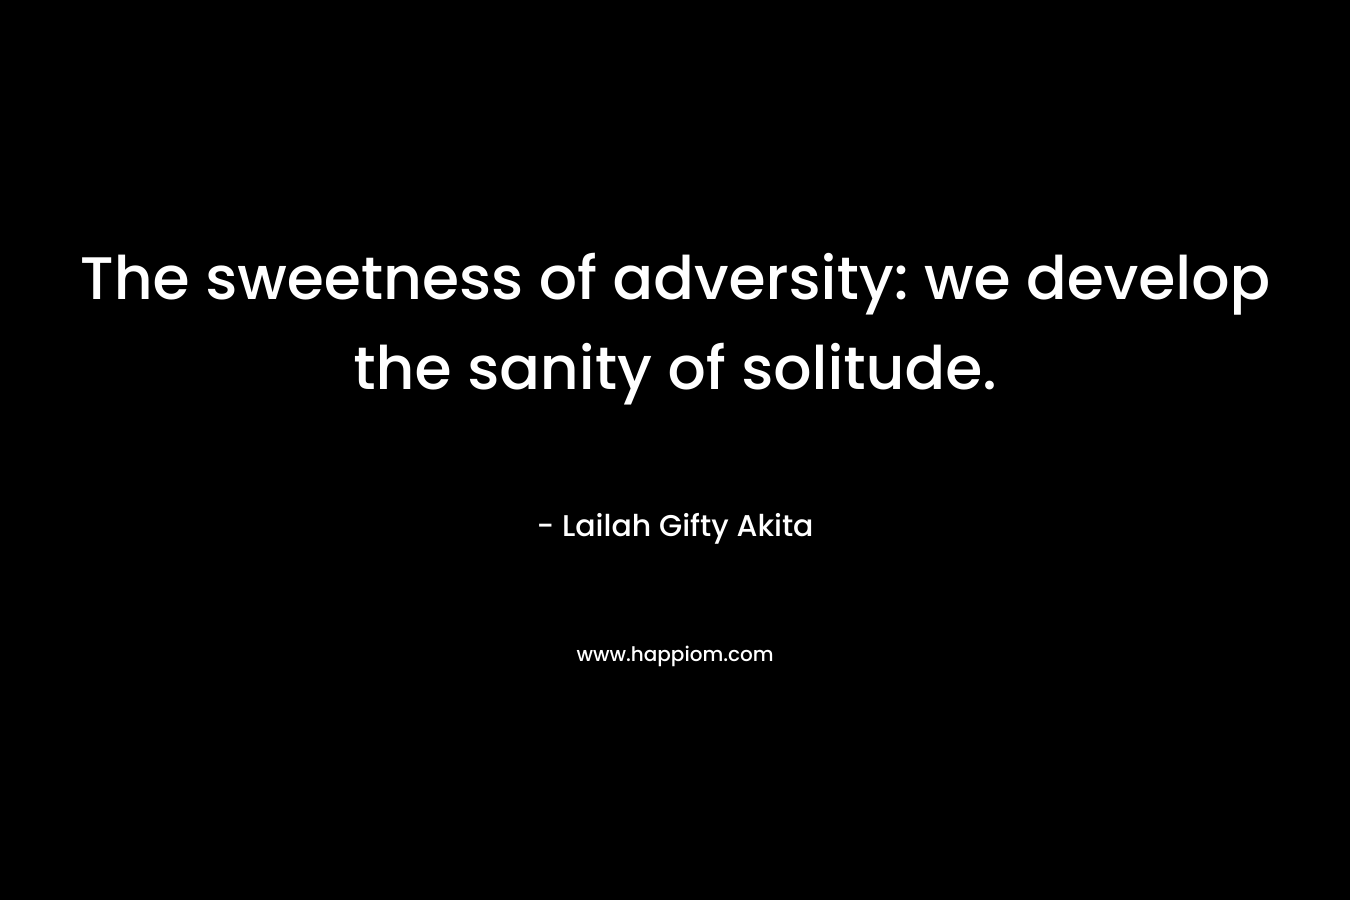 The sweetness of adversity: we develop the sanity of solitude.